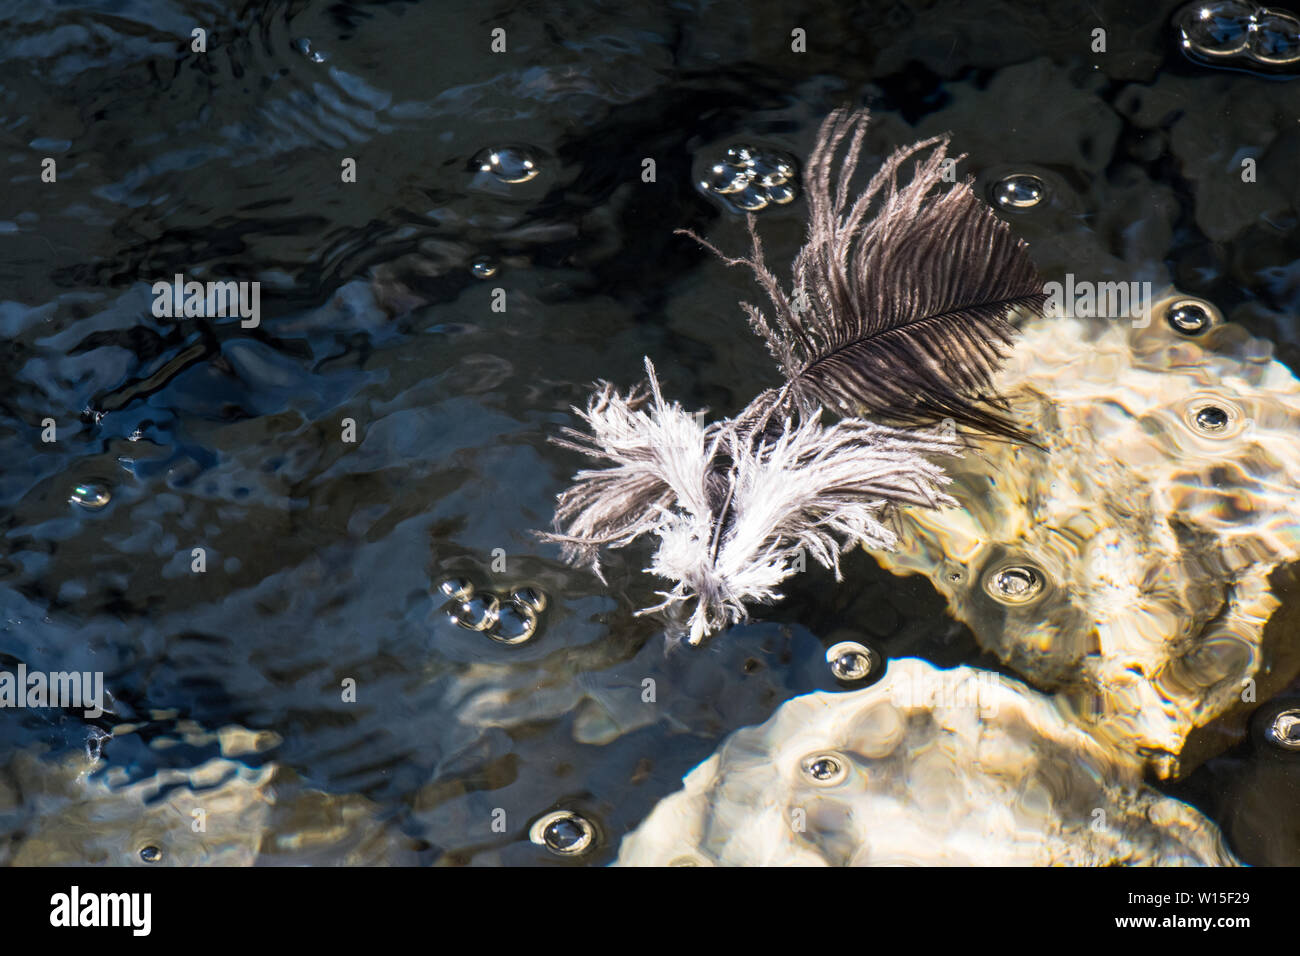 White and brown feathers  floating on crystal clear cool water with air bubbles rocks submerged under the water Stock Photo